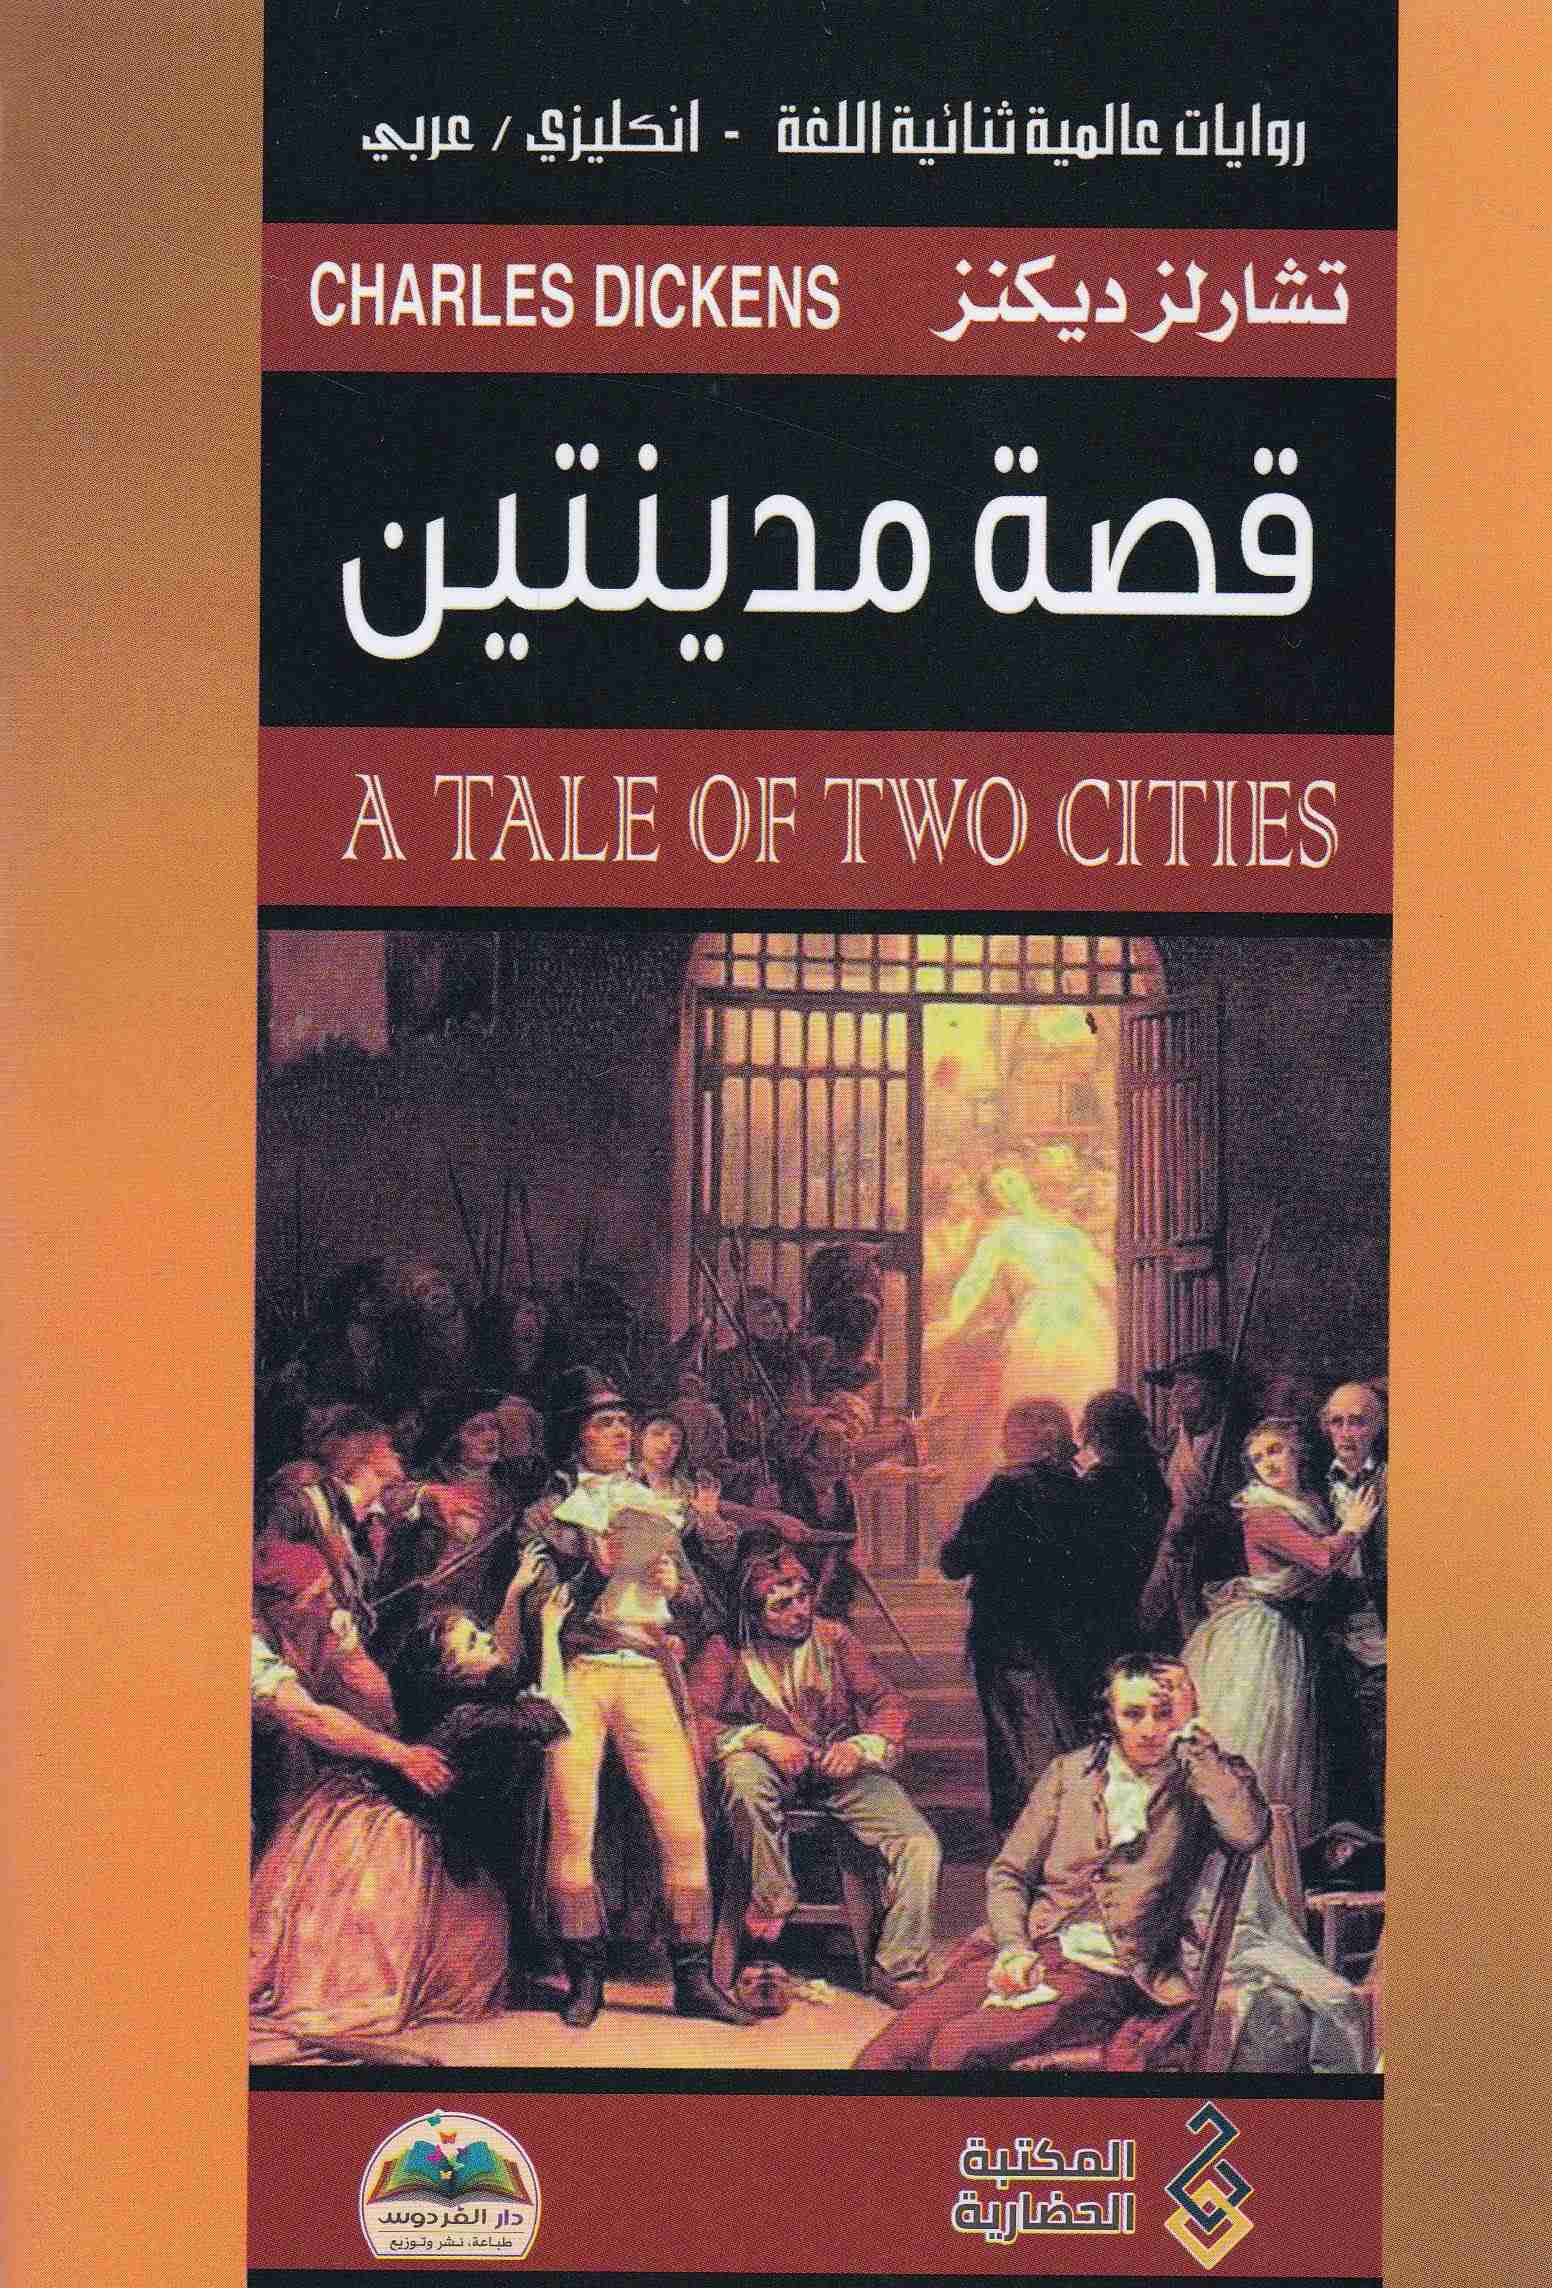 Librairie Bouarroudj - قصة مدينتين A TALE OF TWO CITIES EN-AR      C27